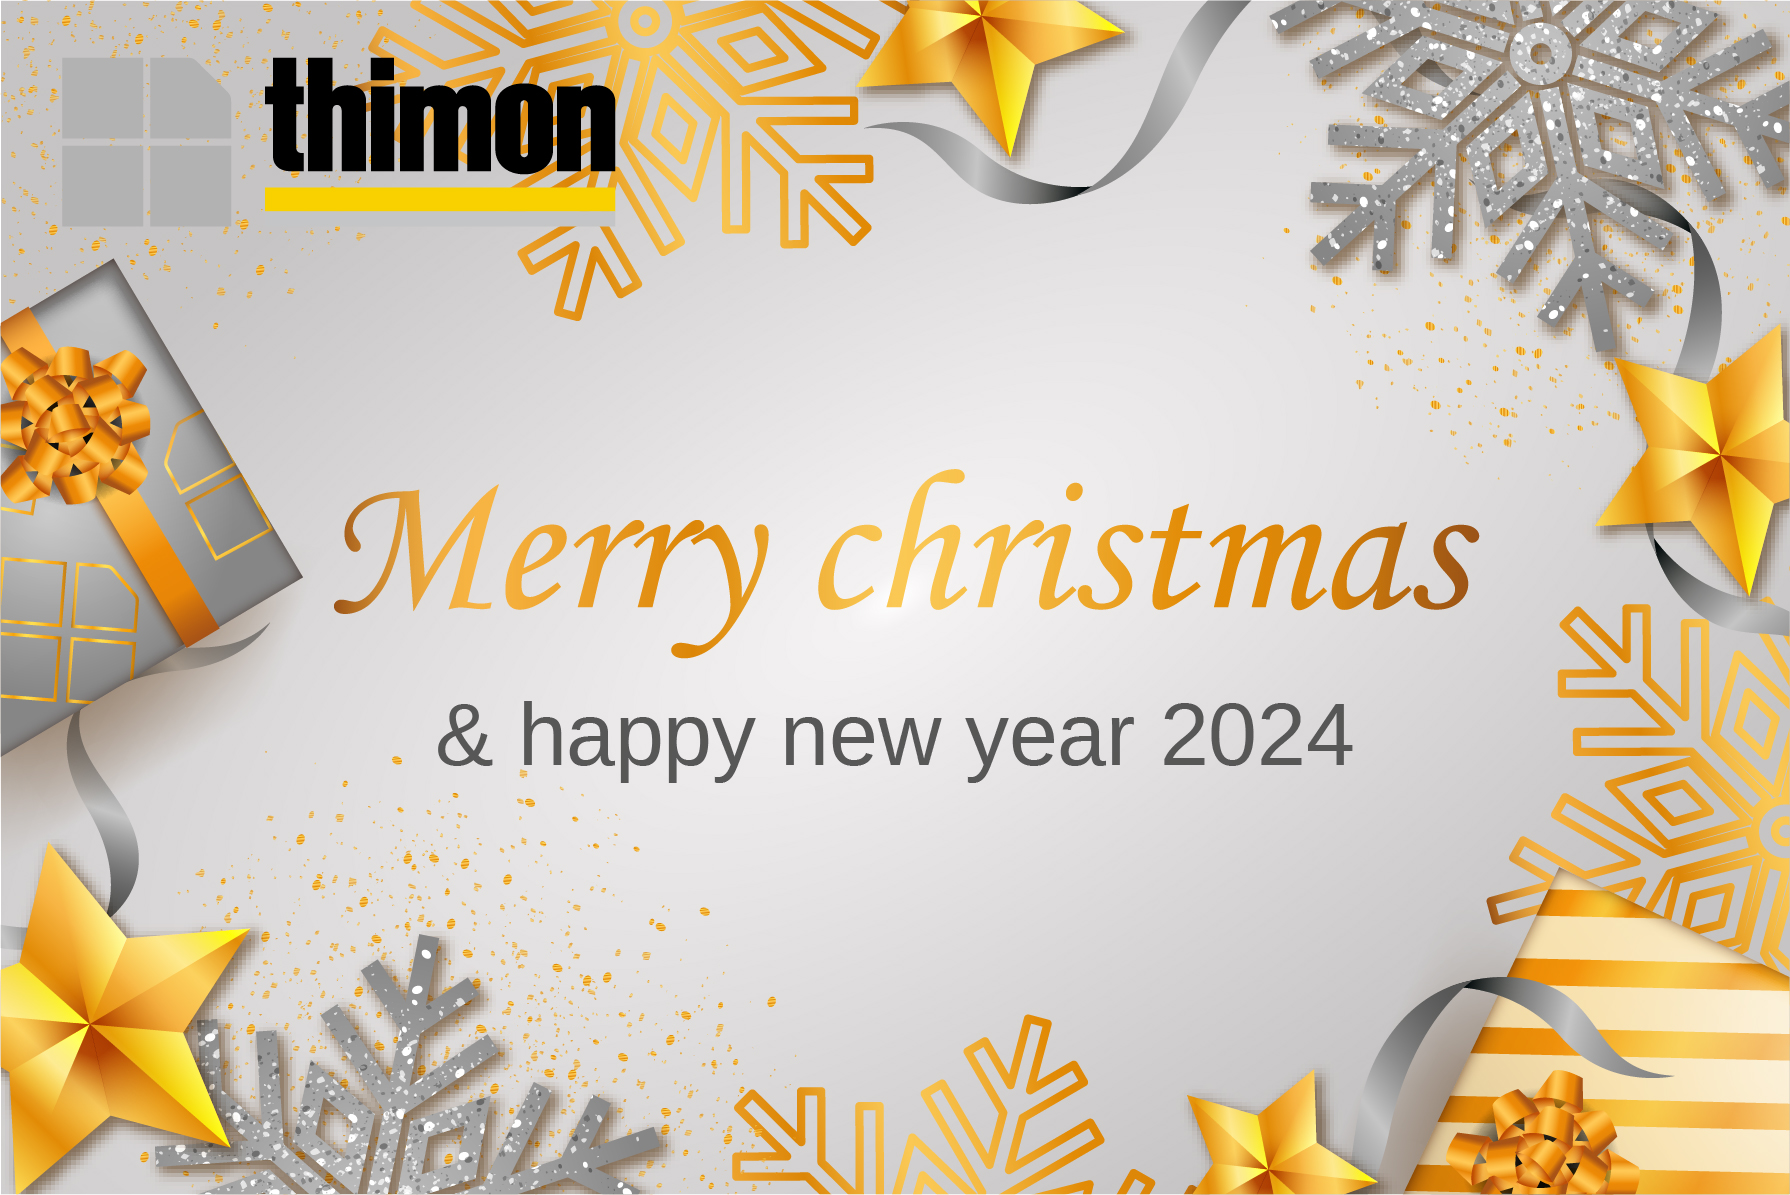 Merry Christmas and Happy New Year 2024!